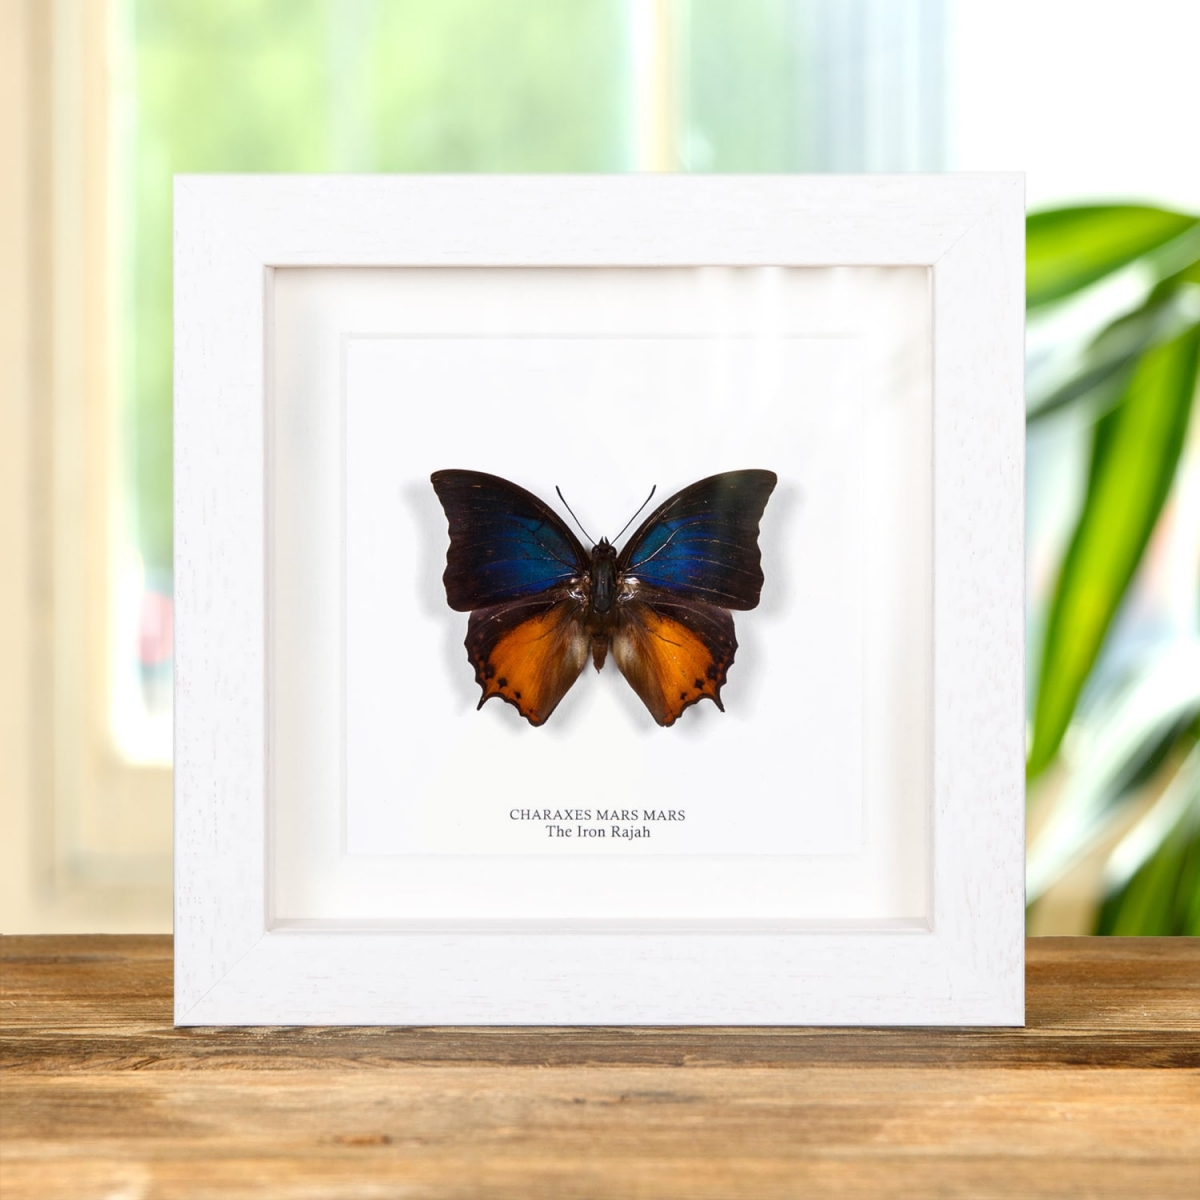 The Iron Rajah Butterfly In Box Frame (Charaxes mars mars)